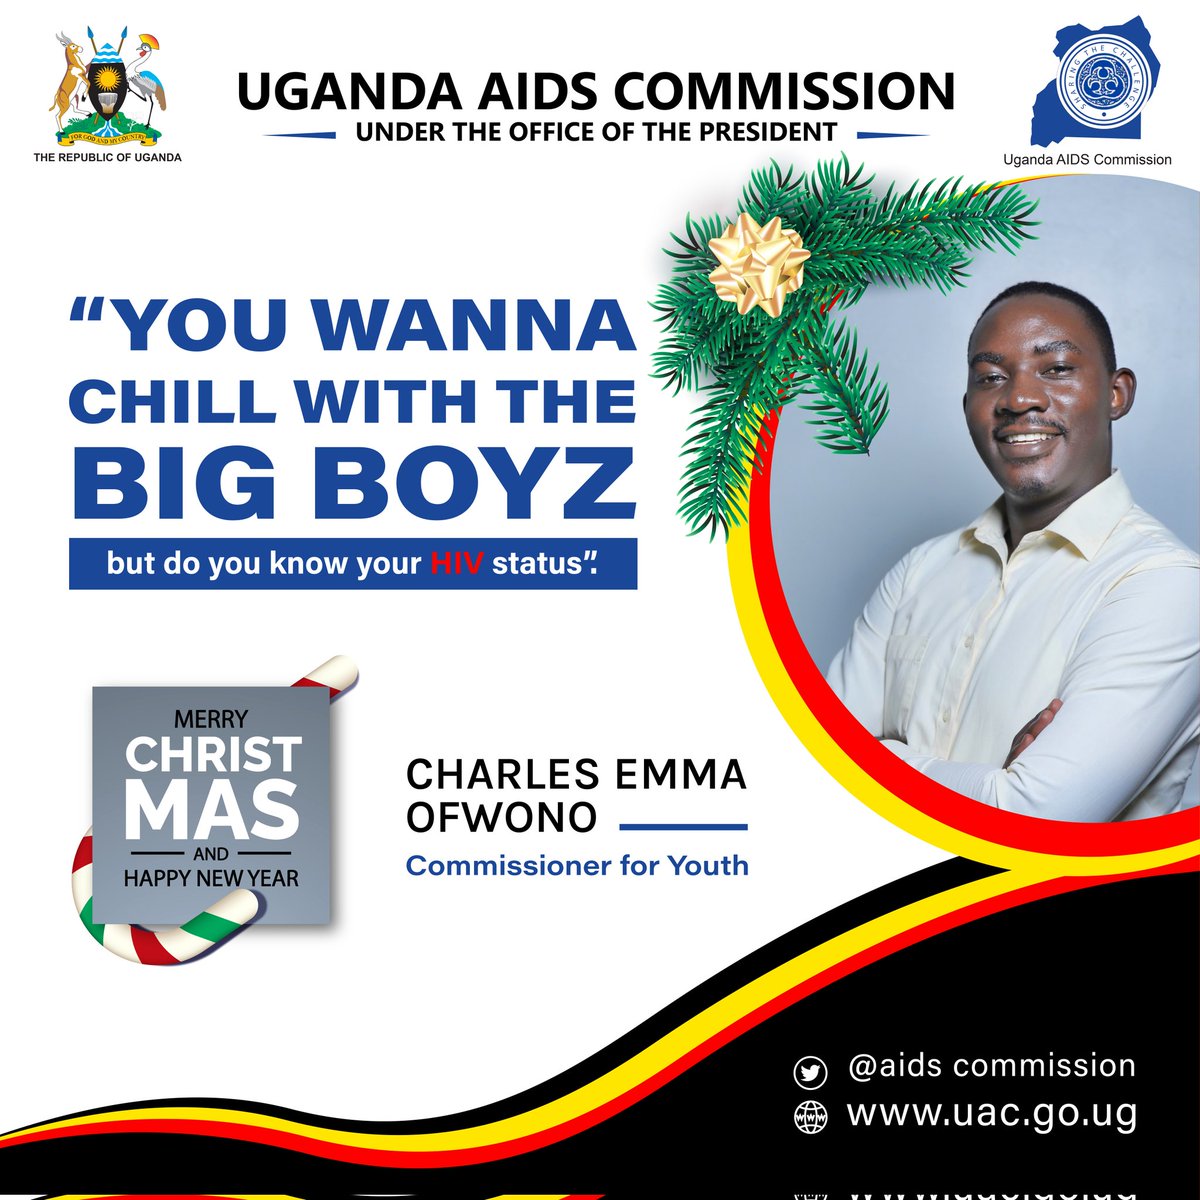 If you wanna chill with the #Bigboyz this Festive Season. 
✅Get to know your #HIVStatus (Test)
✅Get Vaccinated for #COVID19 

@UNAIDS_UG @aidscommission @frontlineaids @agboraidsfoun @UNYPA1 @SRHRAllianceUg @reachahand

#EndingHIVby2030 #EndSARS #PCRtest #hivpreventionsummit